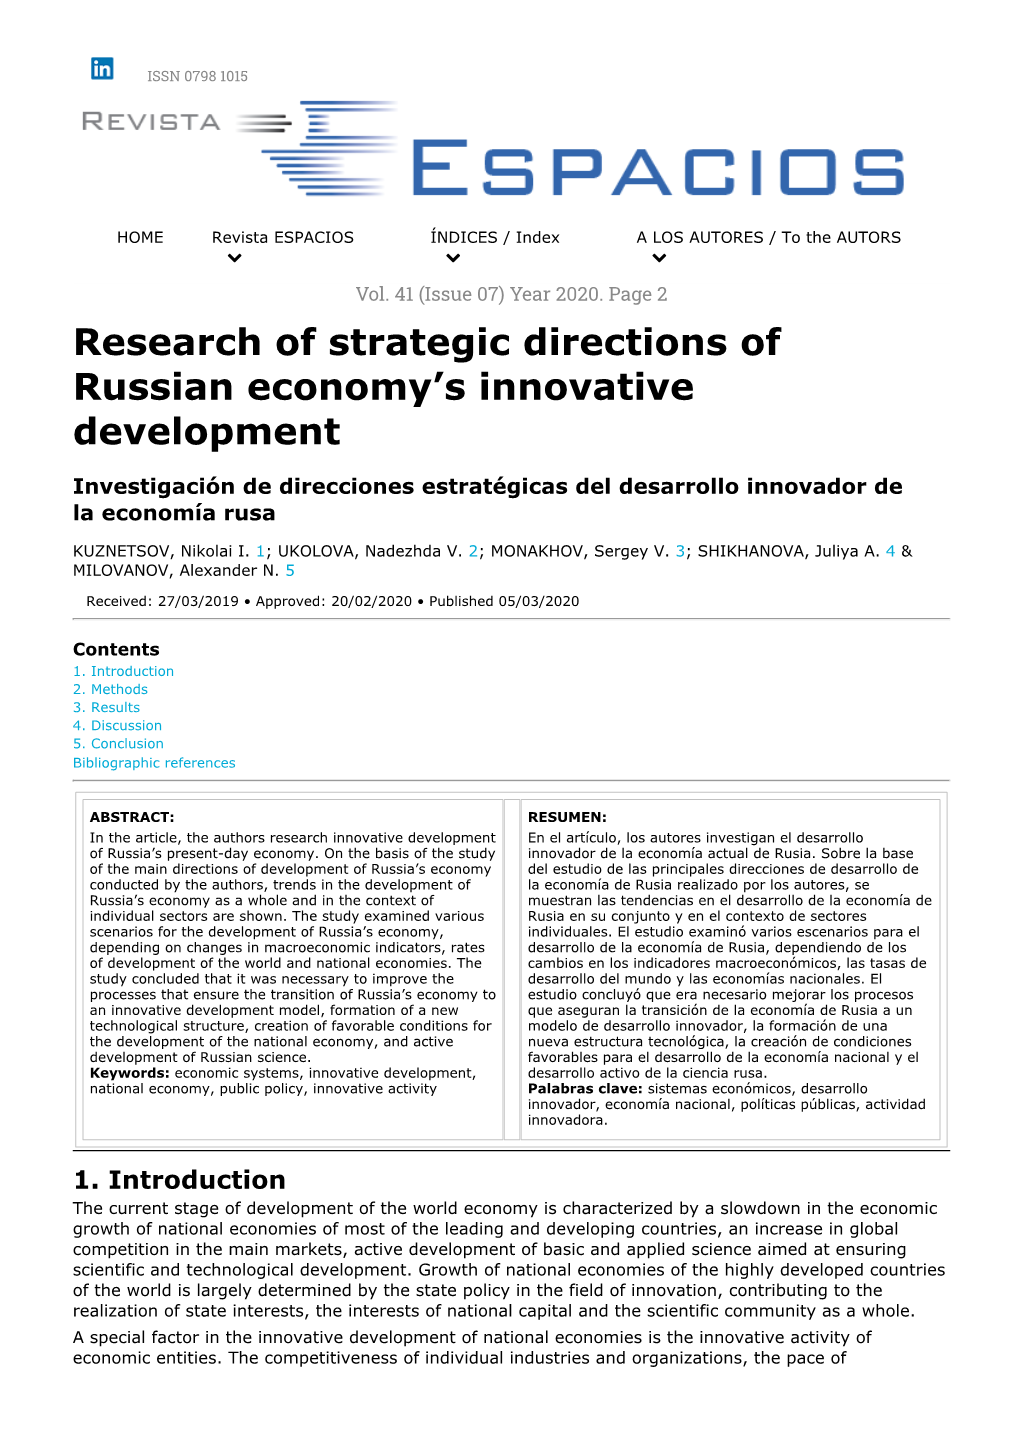 Research of Strategic Directions of Russian Economy's Innovative